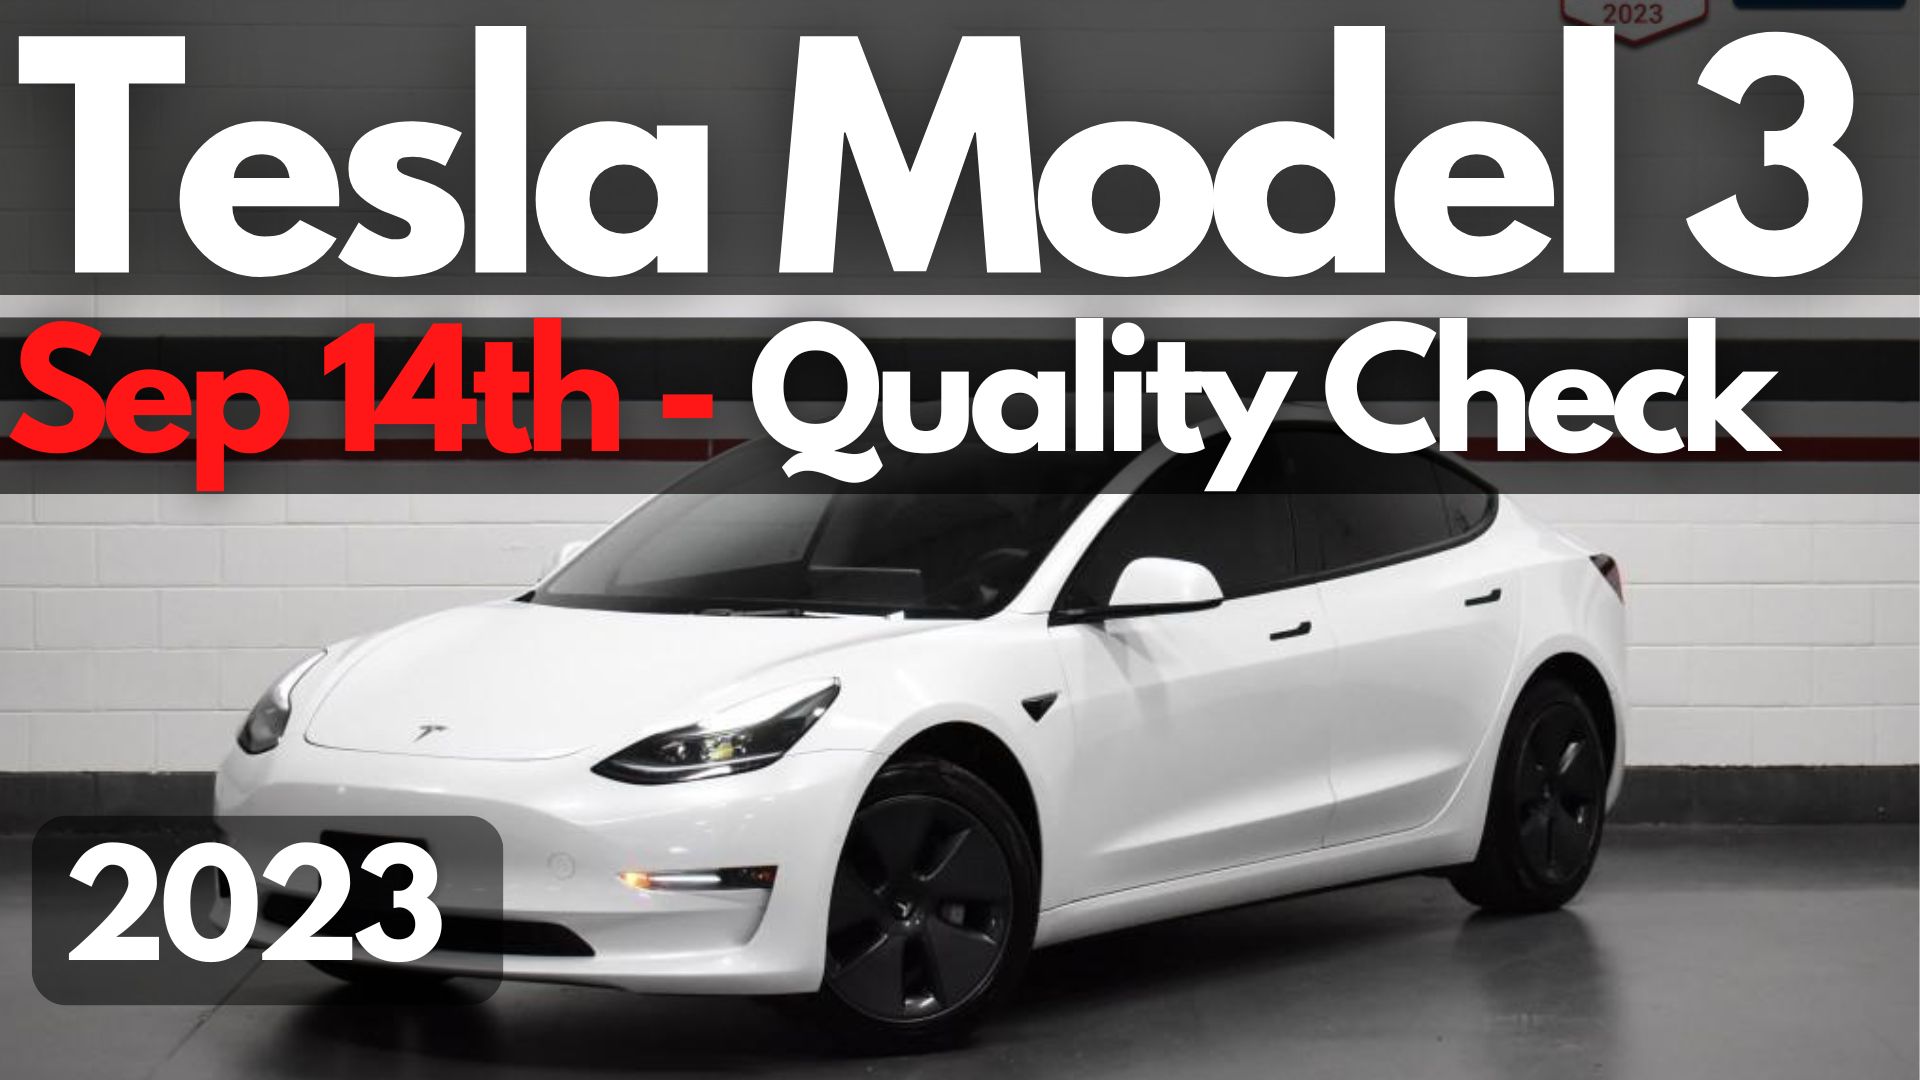 Has Tesla Improved The Model 3 Build Quality For Sept 14, 2023?